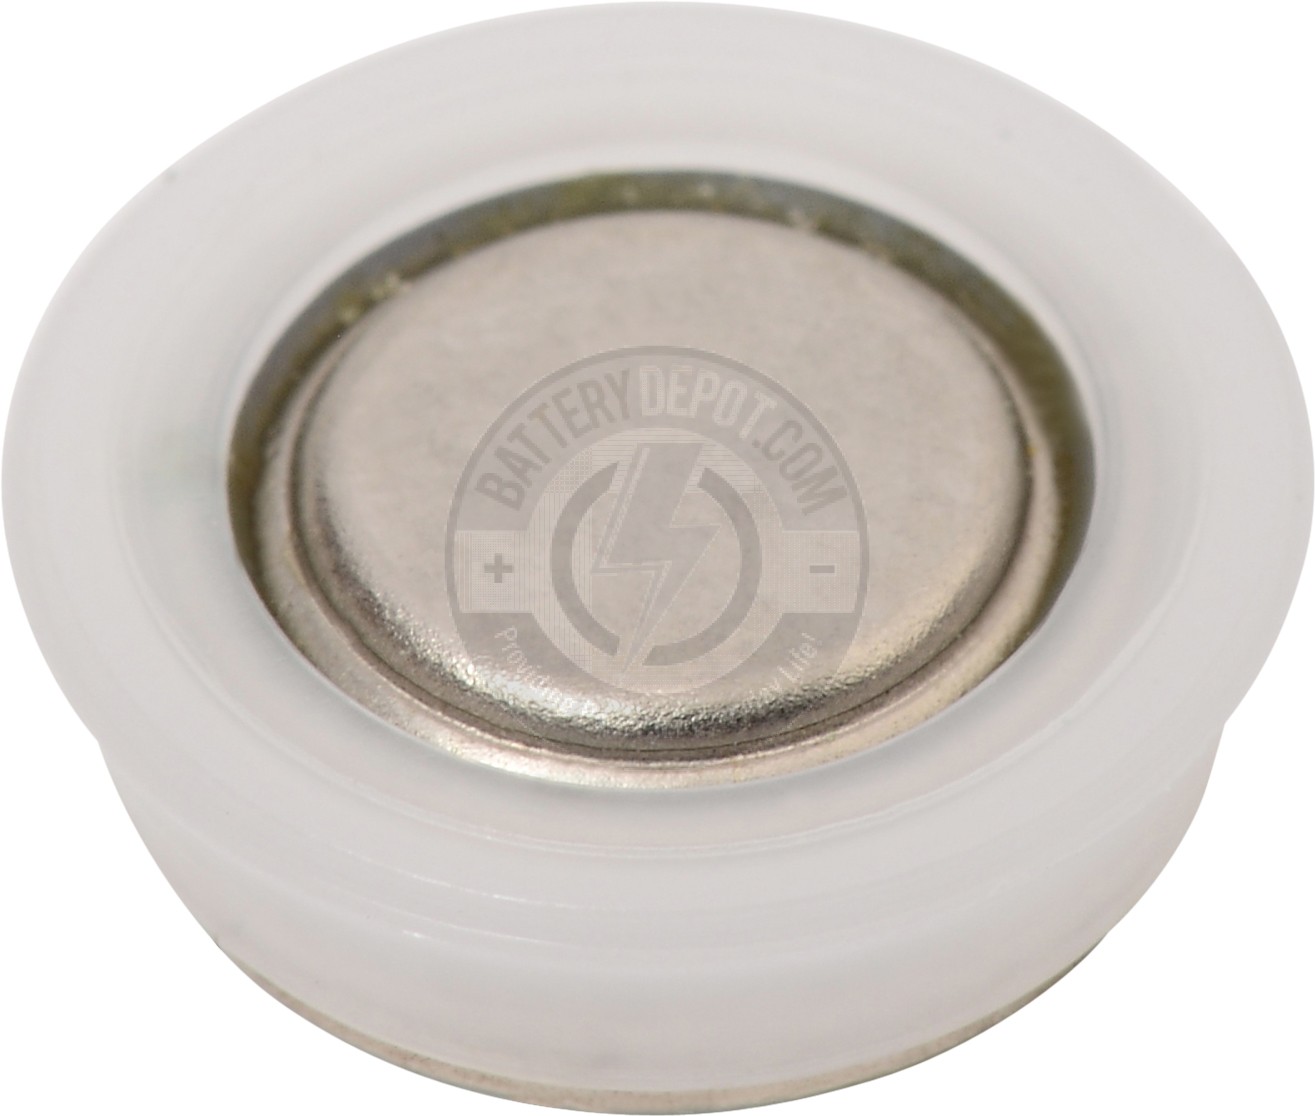 V400PX Button Cell Battery